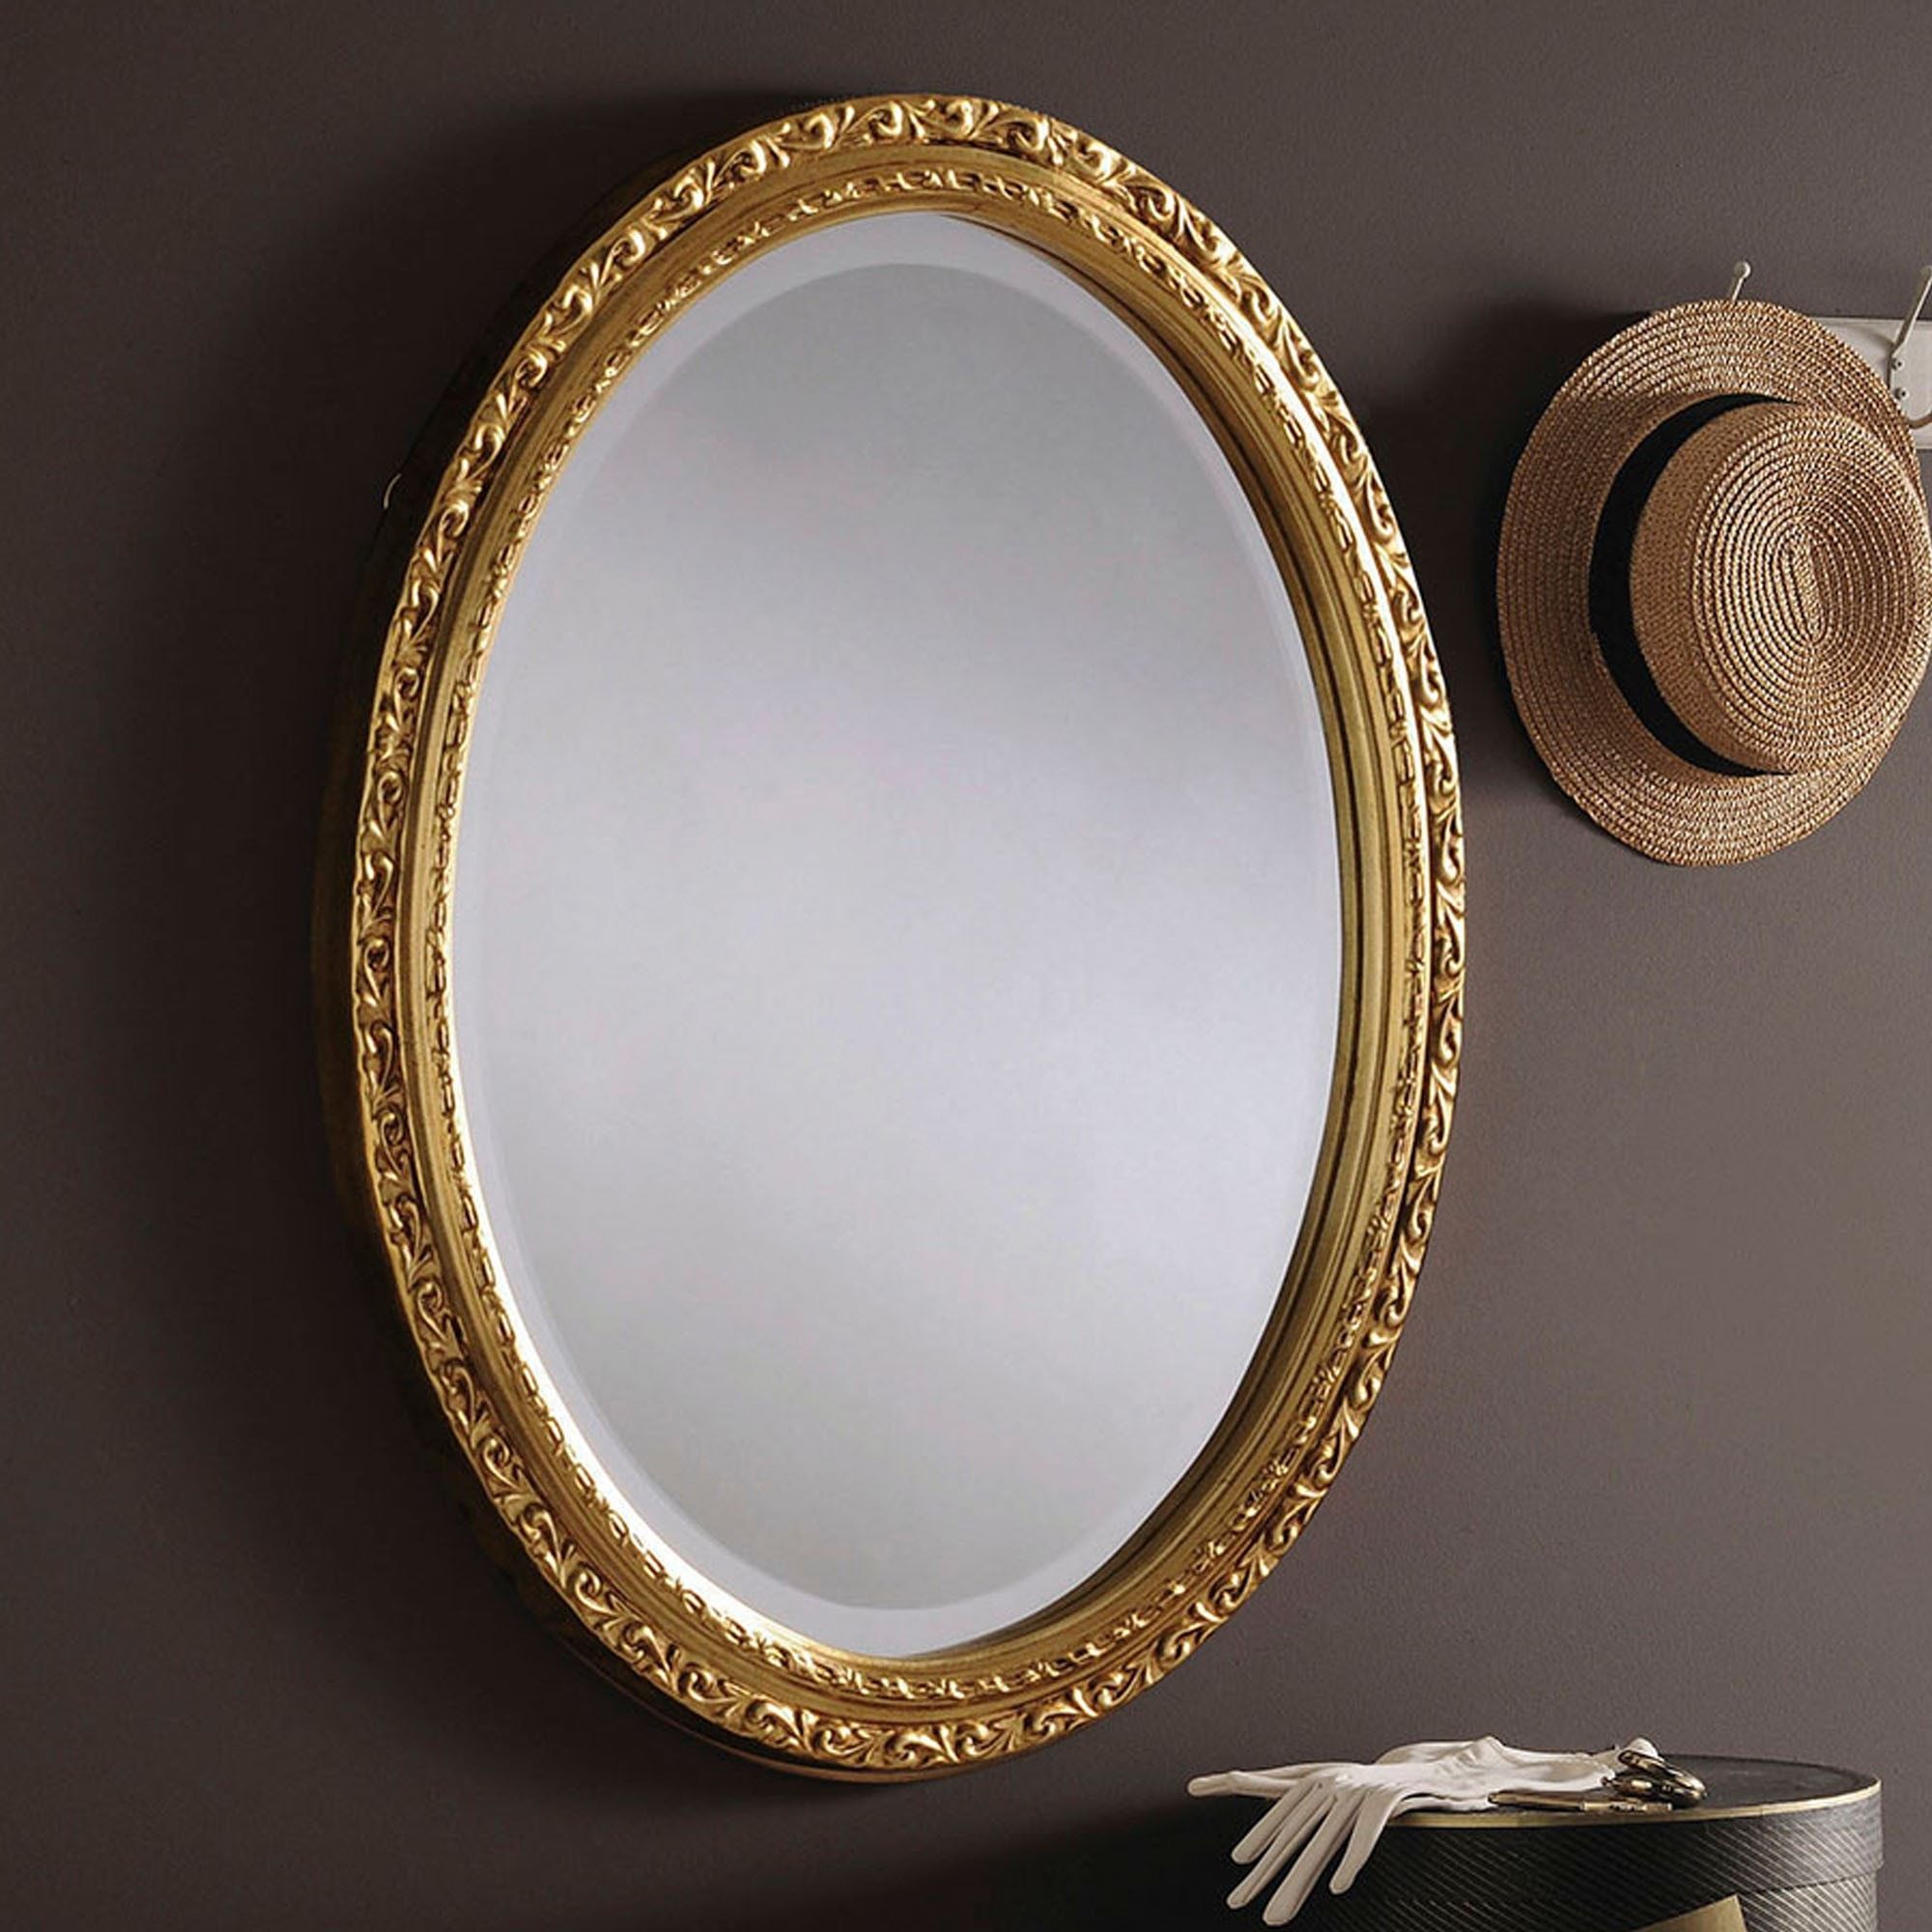 Decorative Gold Ornate Oval Wall Mirror | Wall Mirrors Throughout Nickel Framed Oval Wall Mirrors (View 1 of 15)